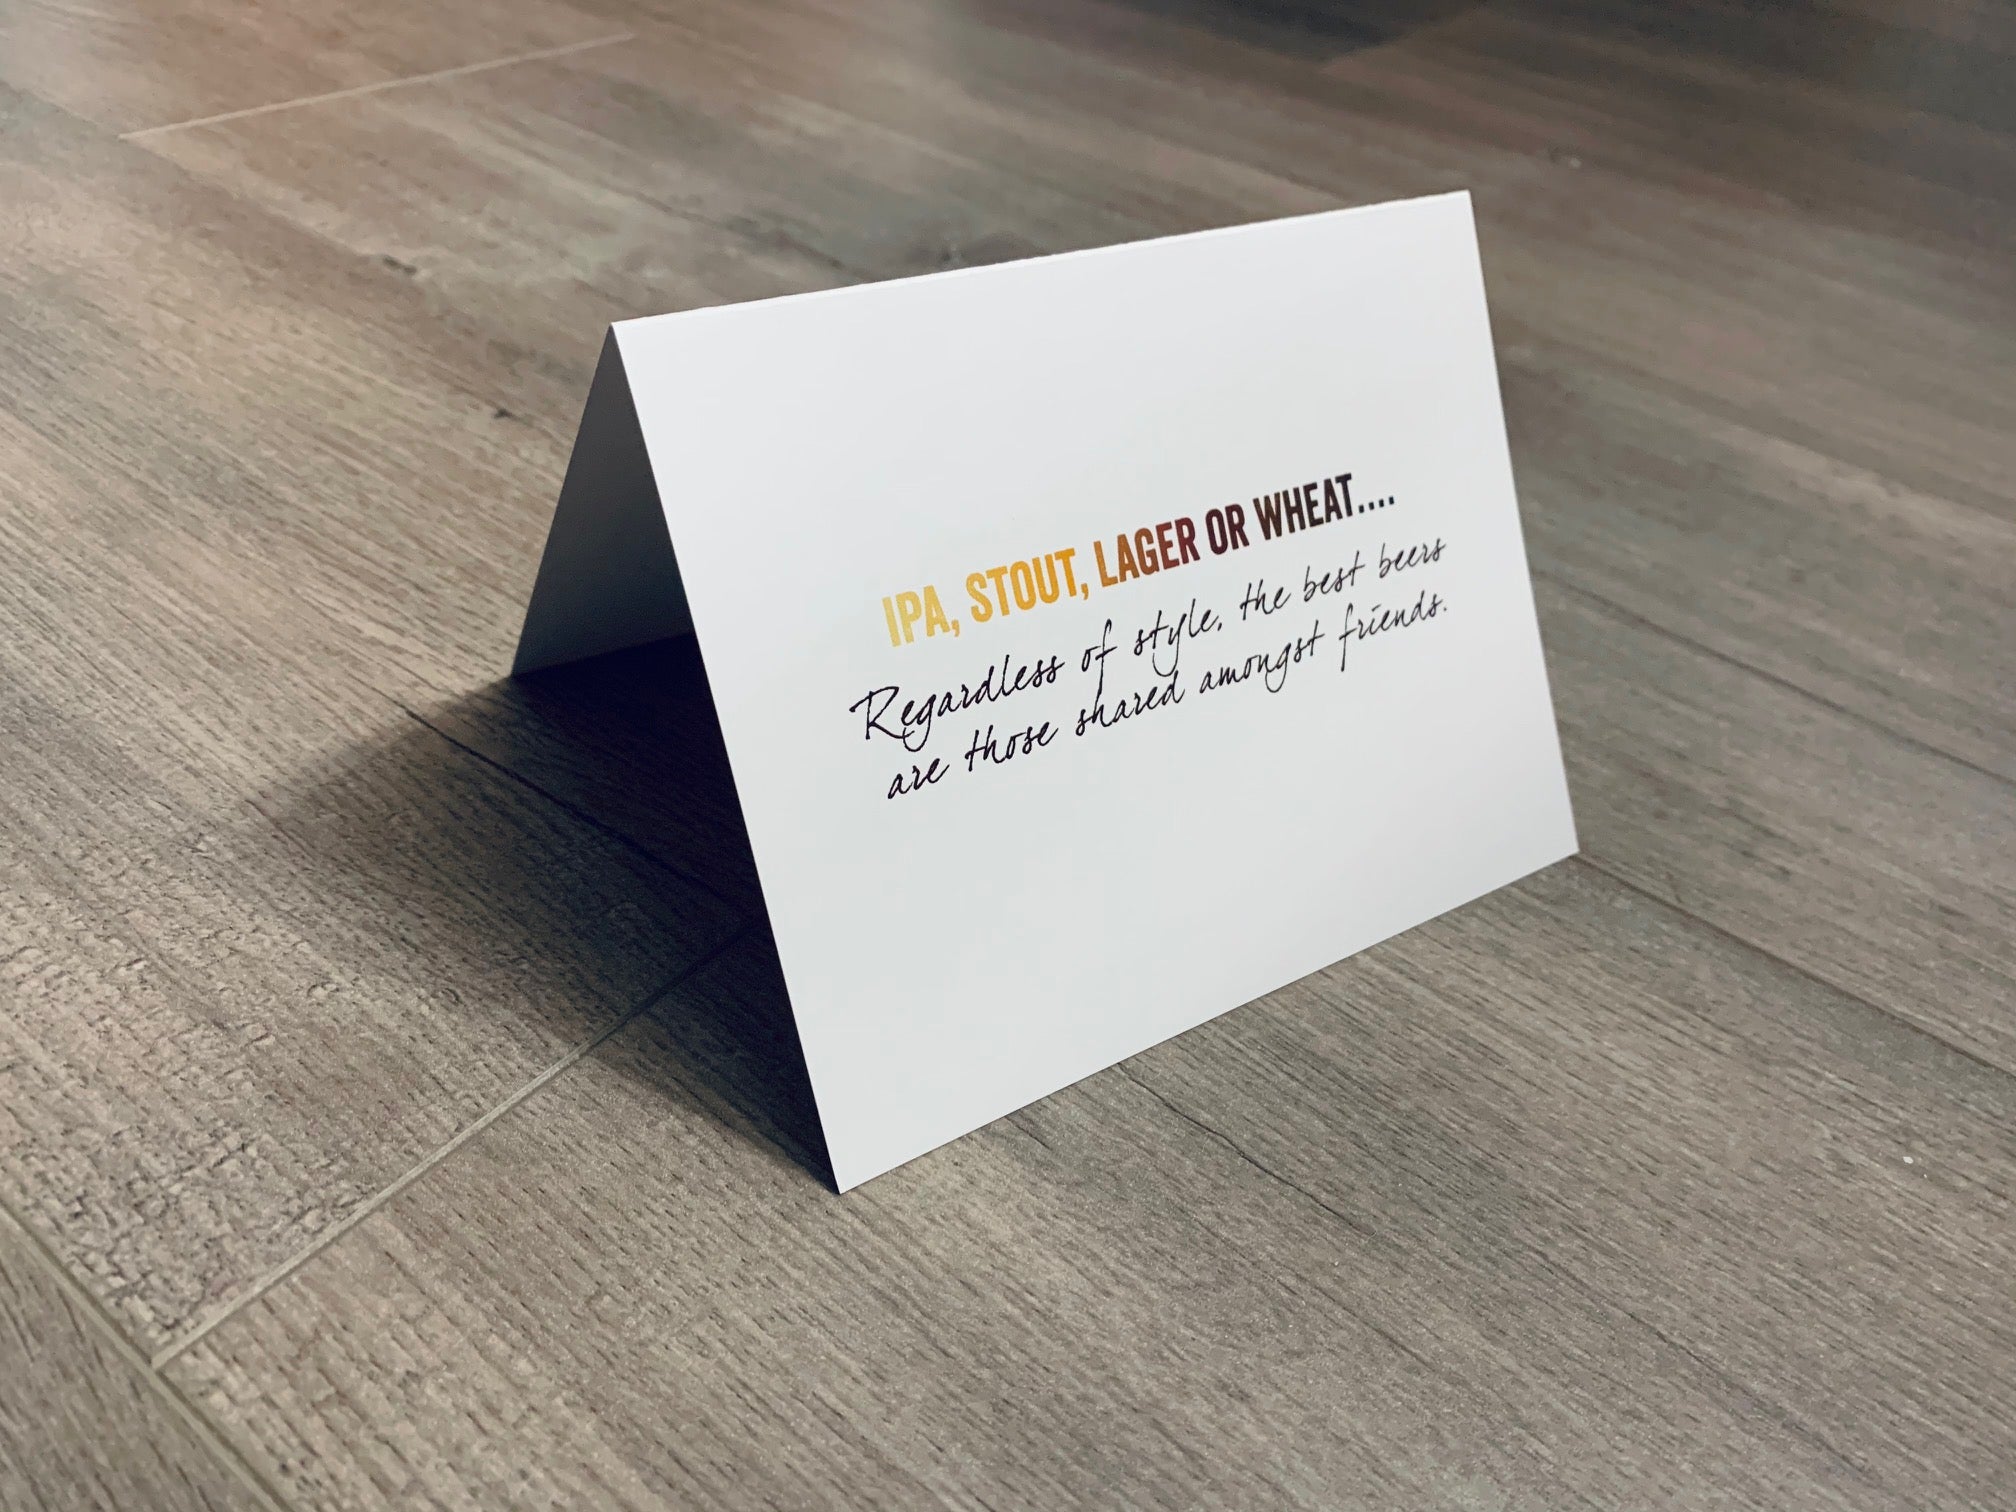 A white card is propped on a gray wood floor. The card reads, "IPA, stout, lager or wheat... Regardless of style, the best beers are those shared amongst friends." Beer Lovers Collection by Stationare.